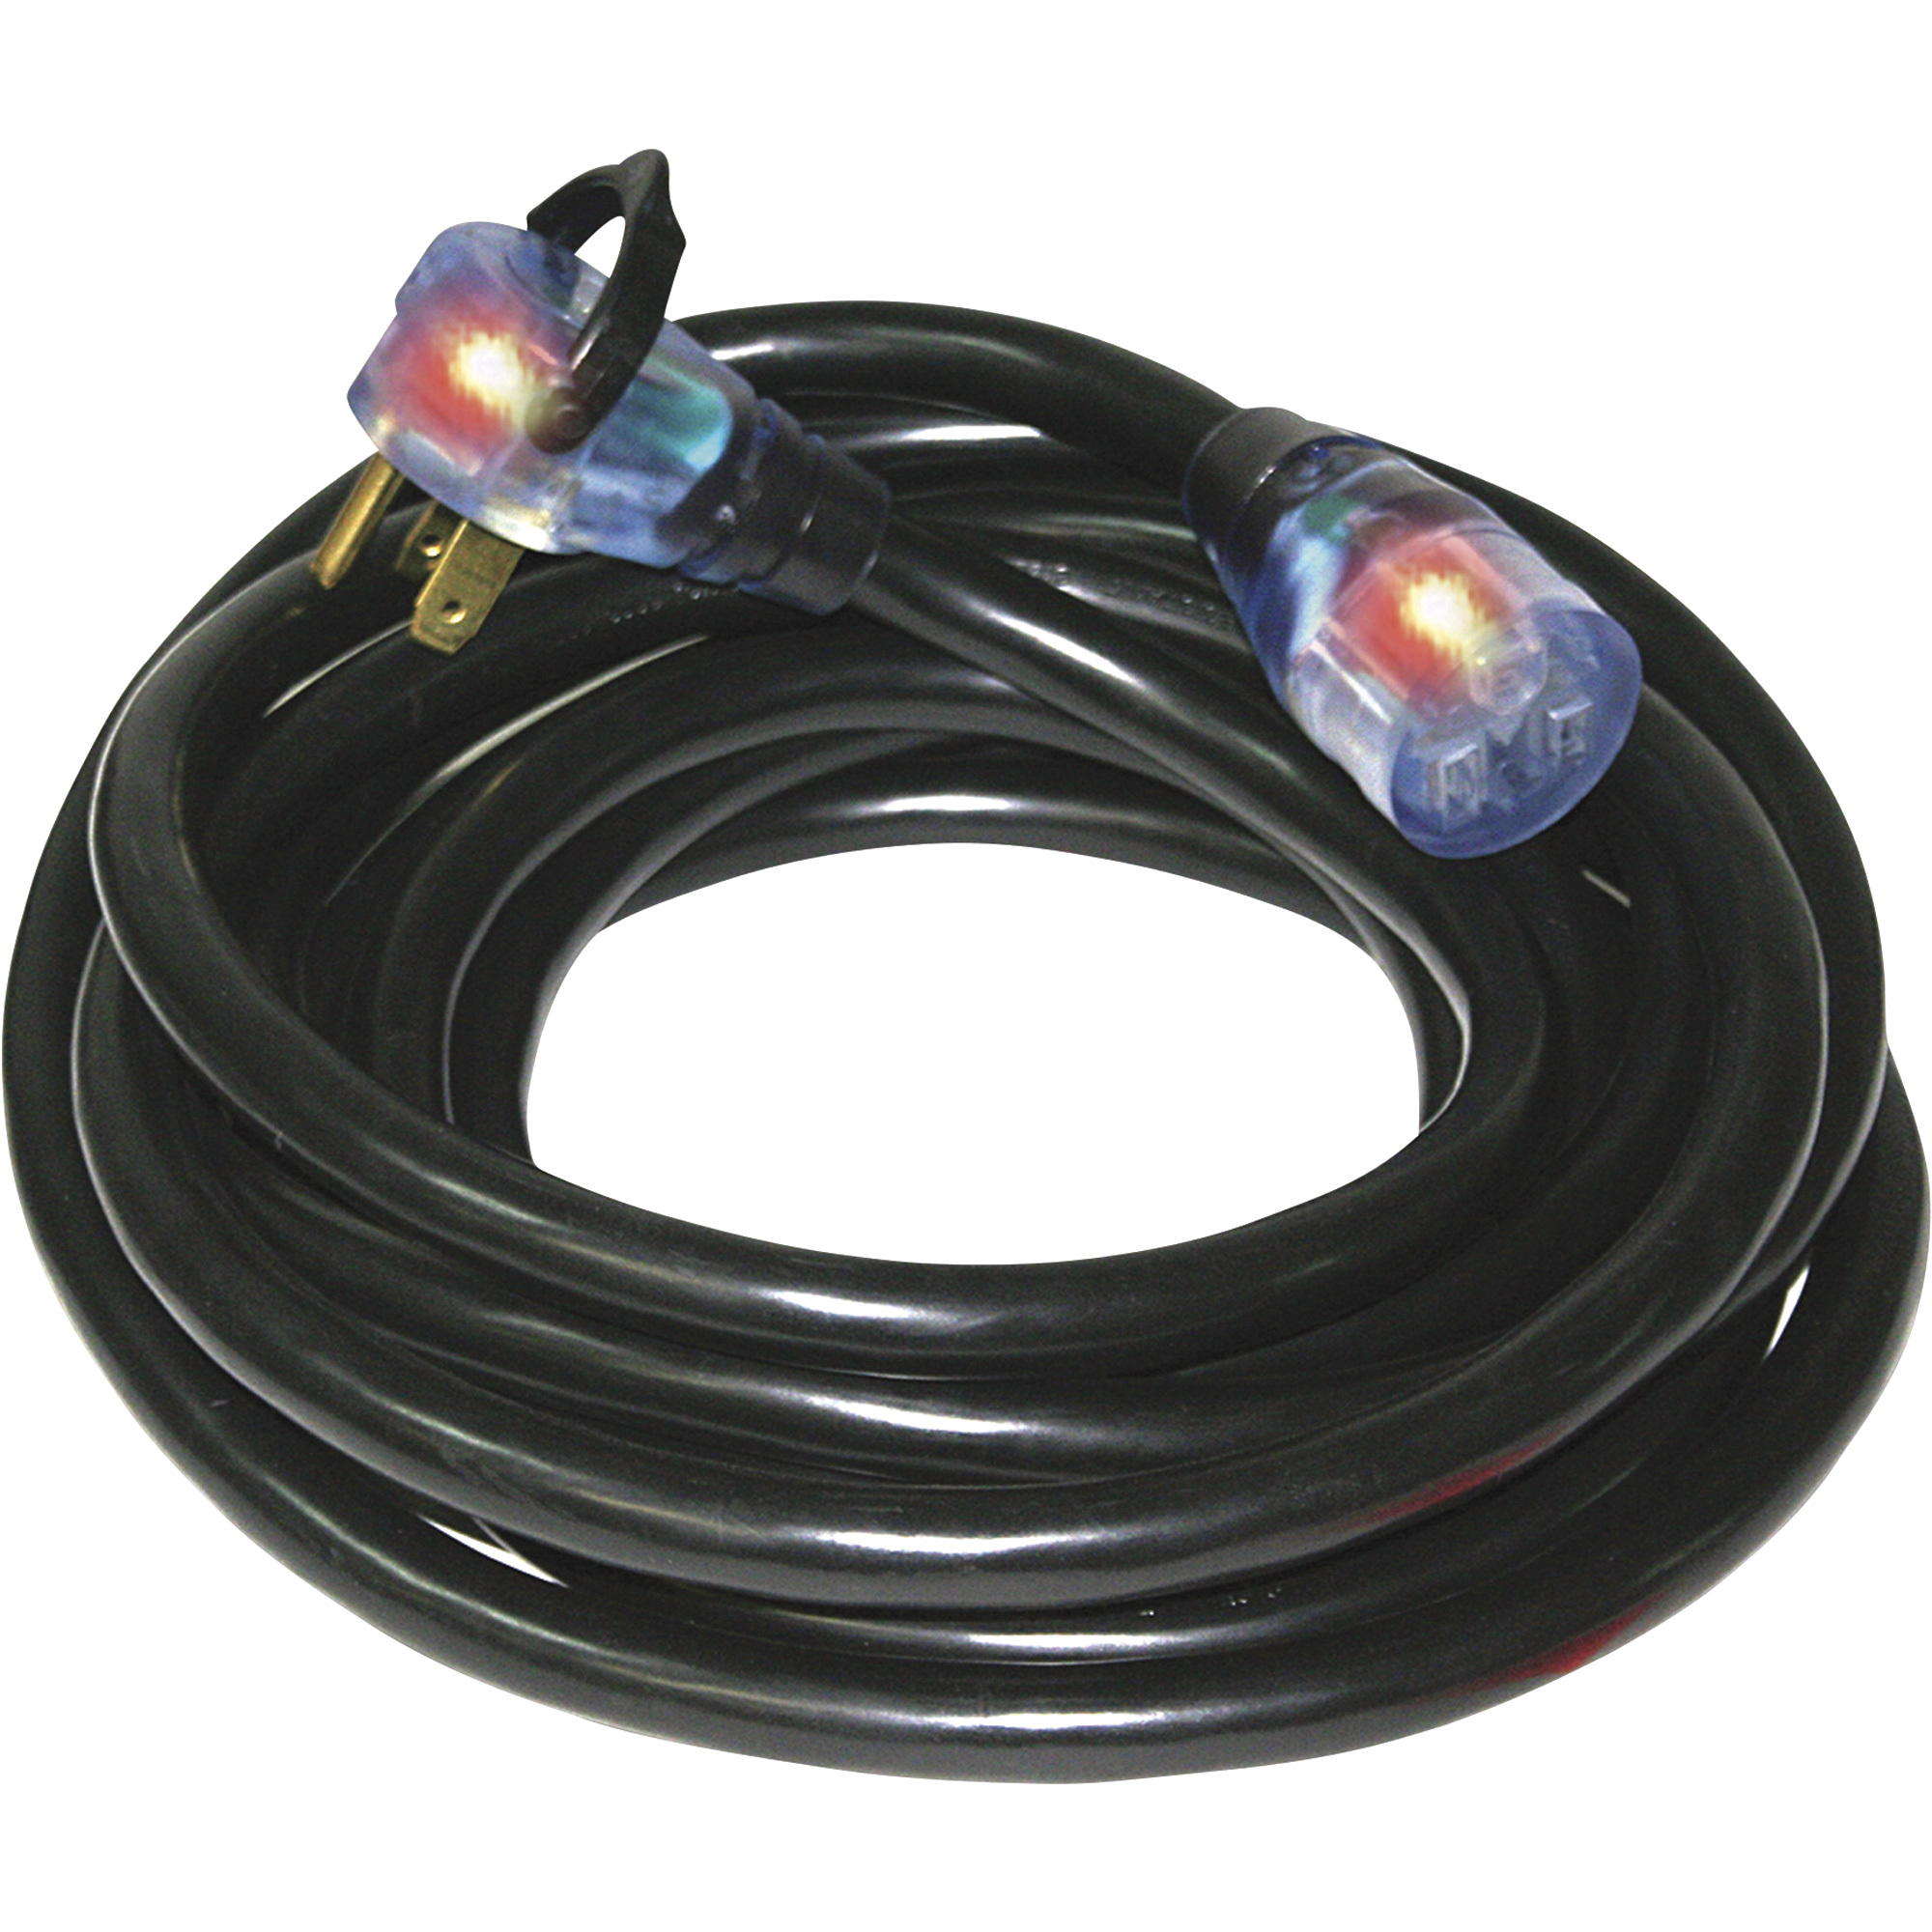 Century Wire and Cable Pro Grip Welding Extension Cord â 25ft., 8 AWG, 40 Amps, Model D13308025